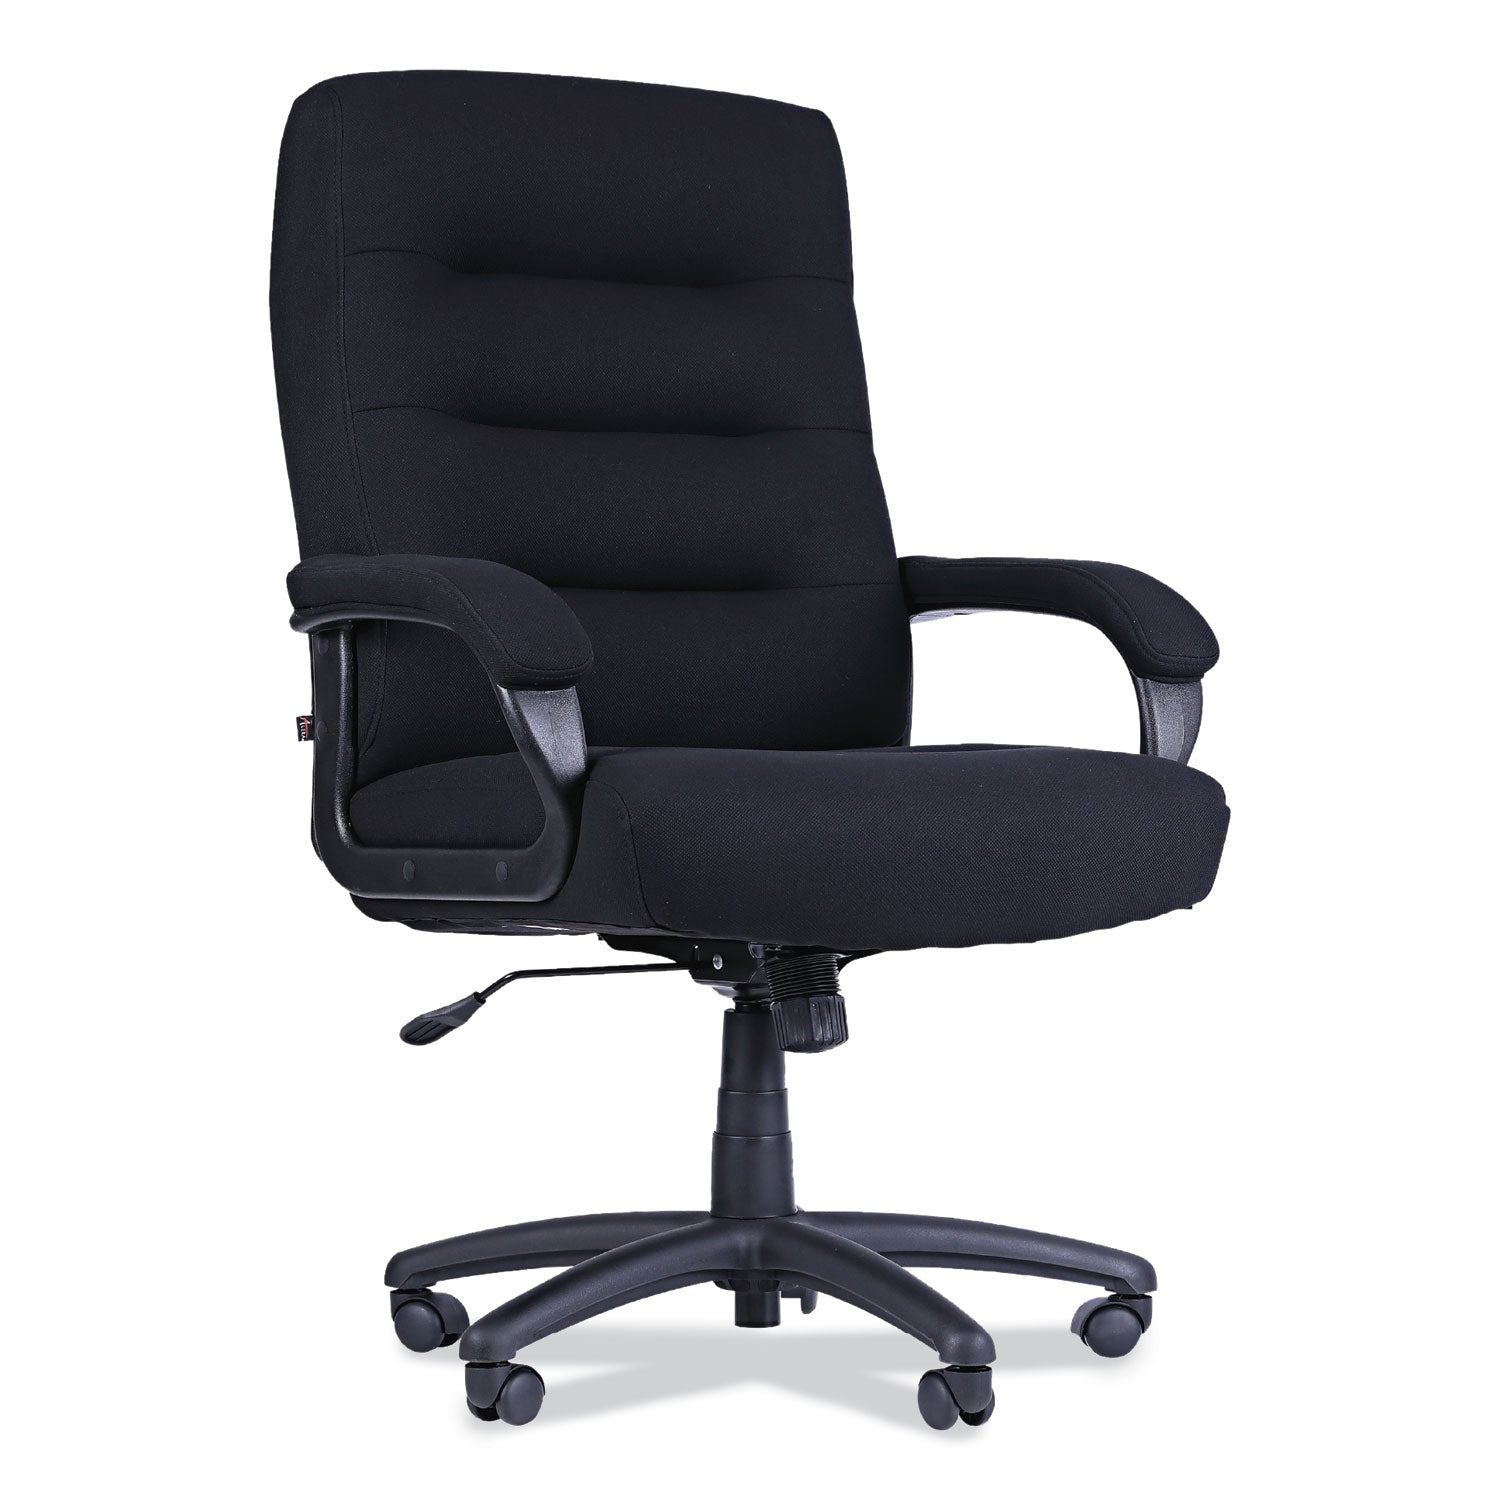 alera-kesson-series-high-back-office-chair-supports-up-to-300-lb-1921-to-227-seat-height-black_aleks4110 - 1